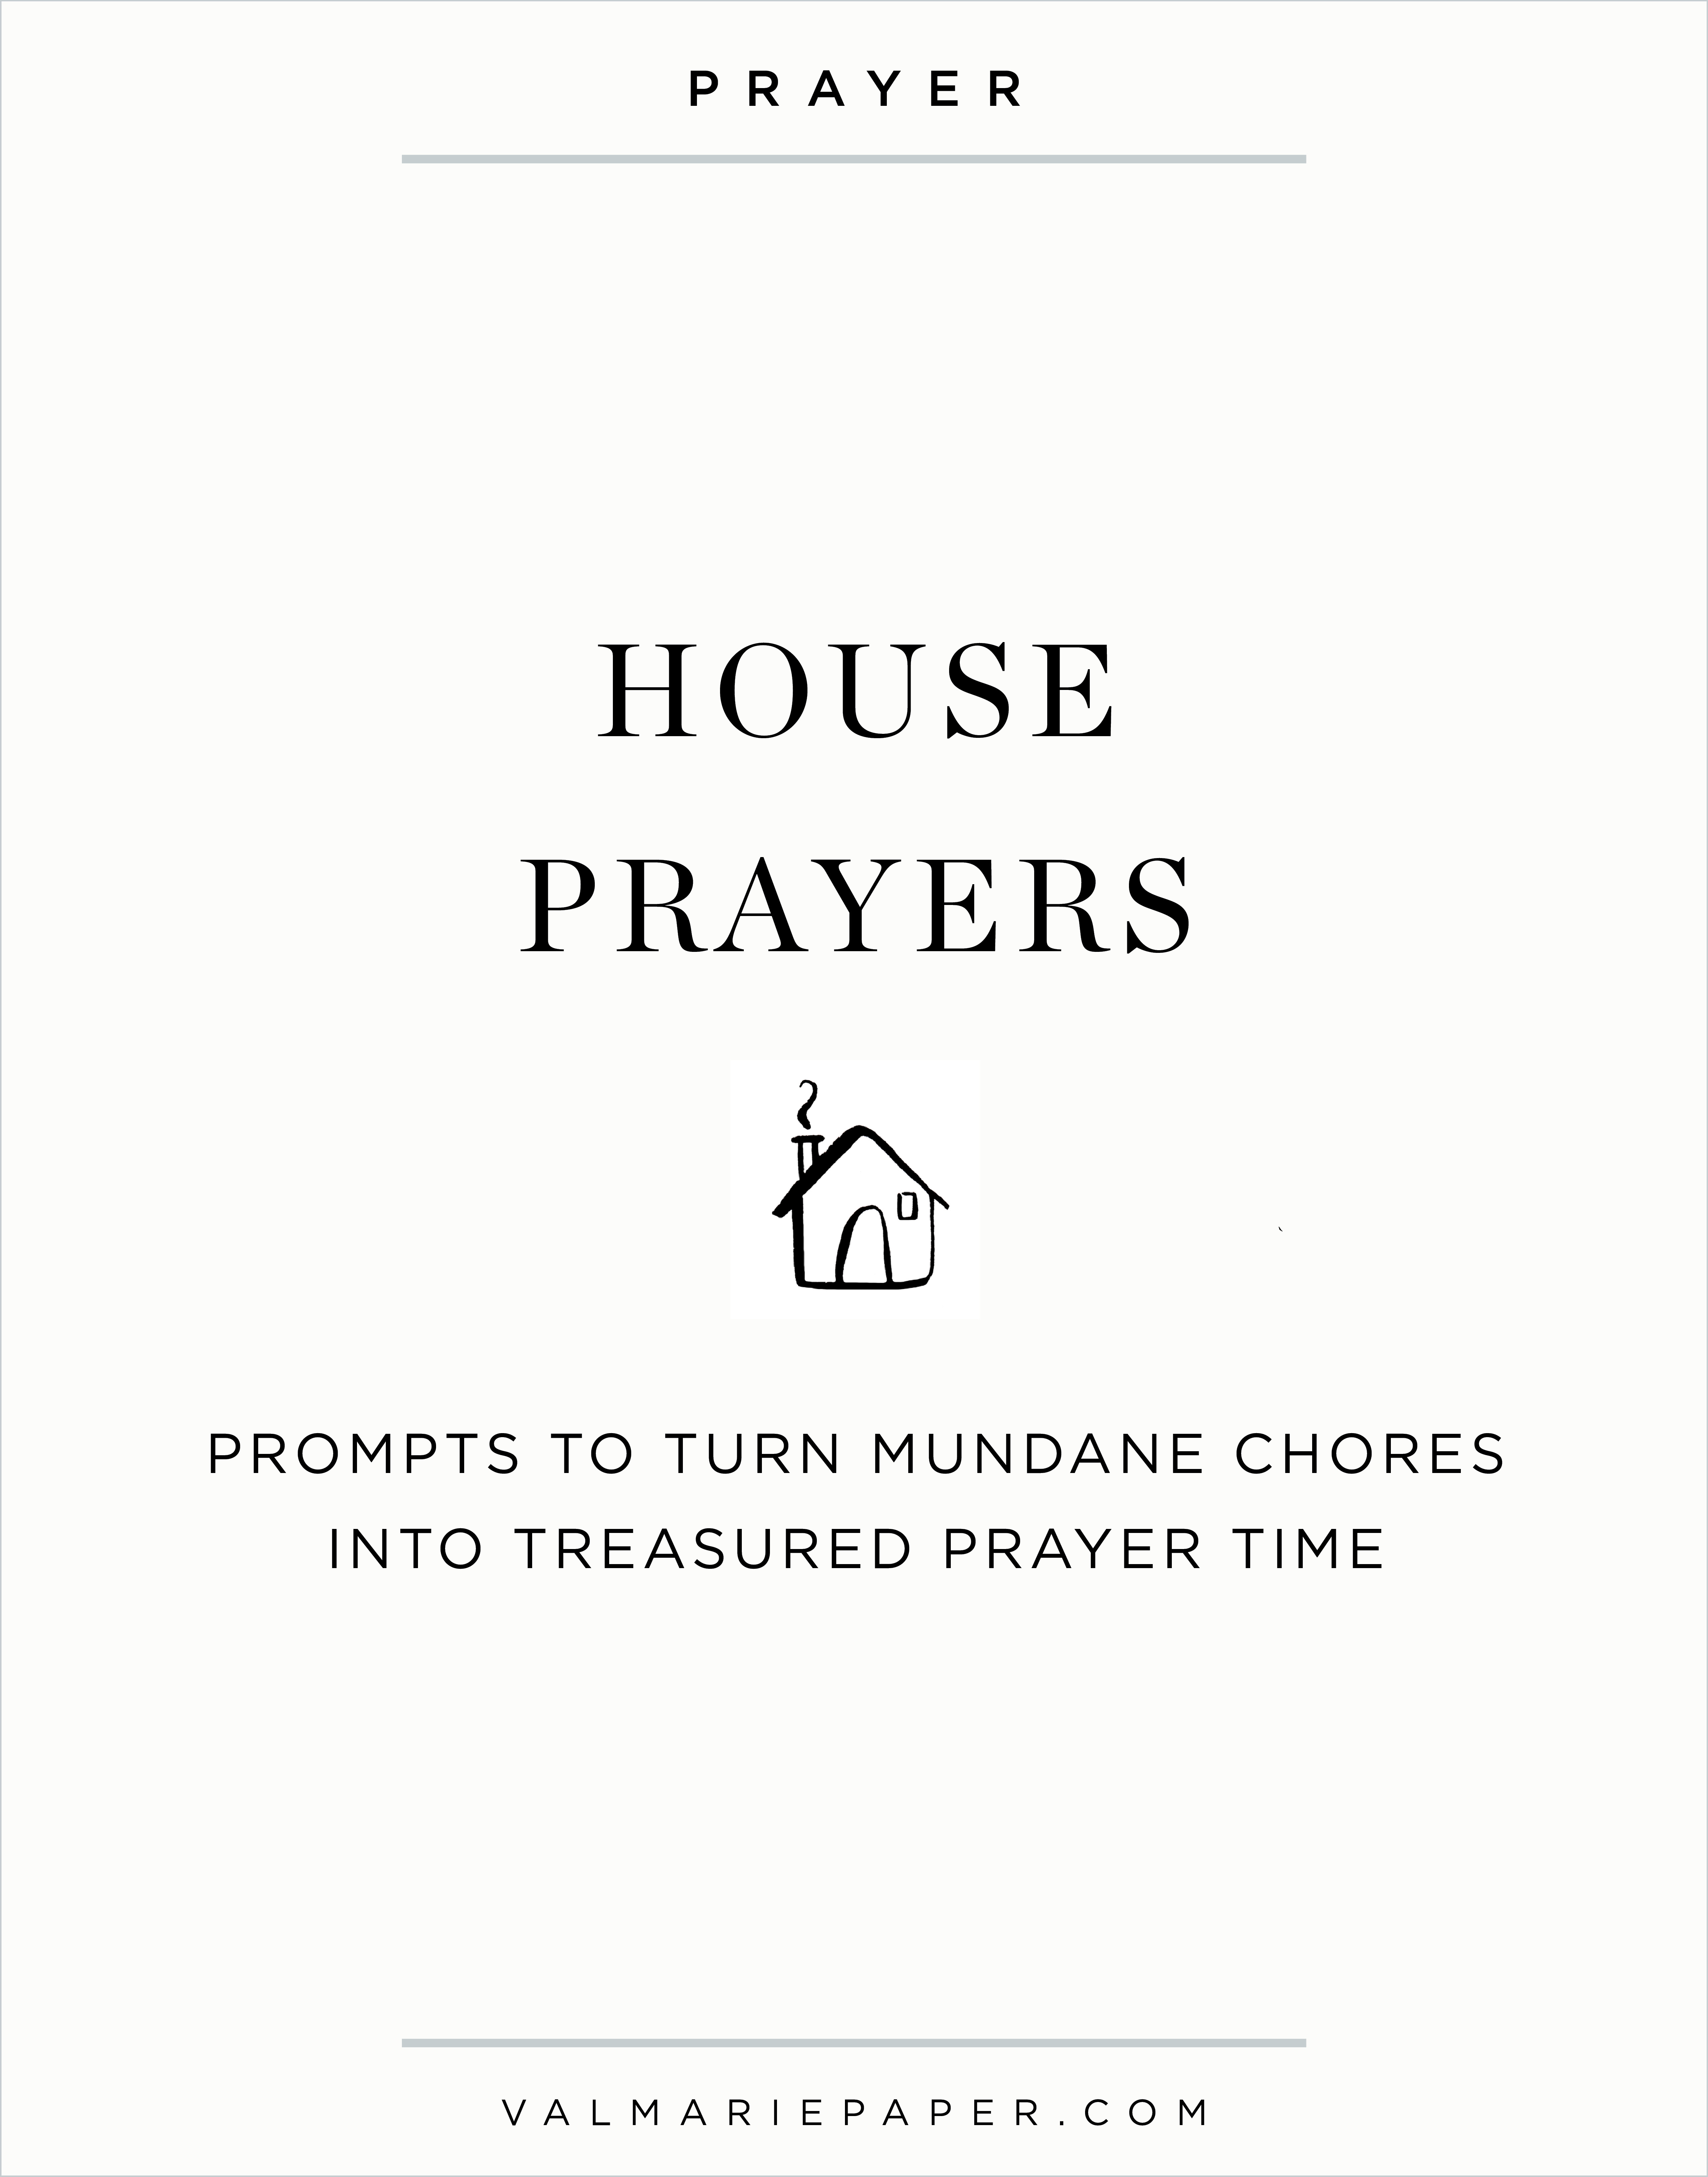 House Prayers by Valerie Woerner | Val Marie Paper, prayer journal, tools, diy, home, renovation, faith, Christian, remodel, baby, new mom, Scripture, praying, women's ministry, motherhood